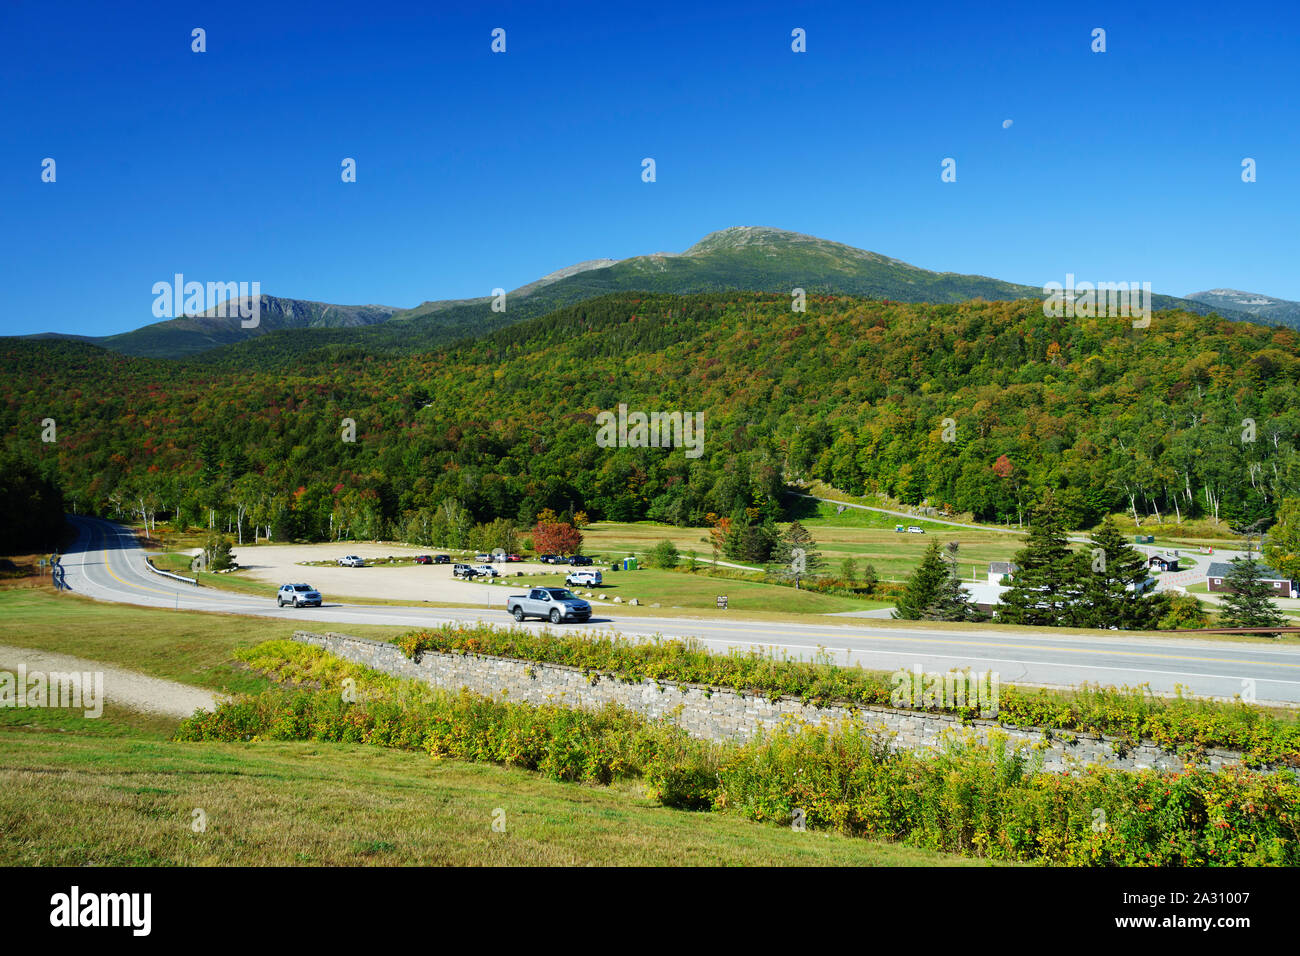 View of route 16 and entrance to the Mount Washington Auto Road, New Hampshire, USA. Stock Photo